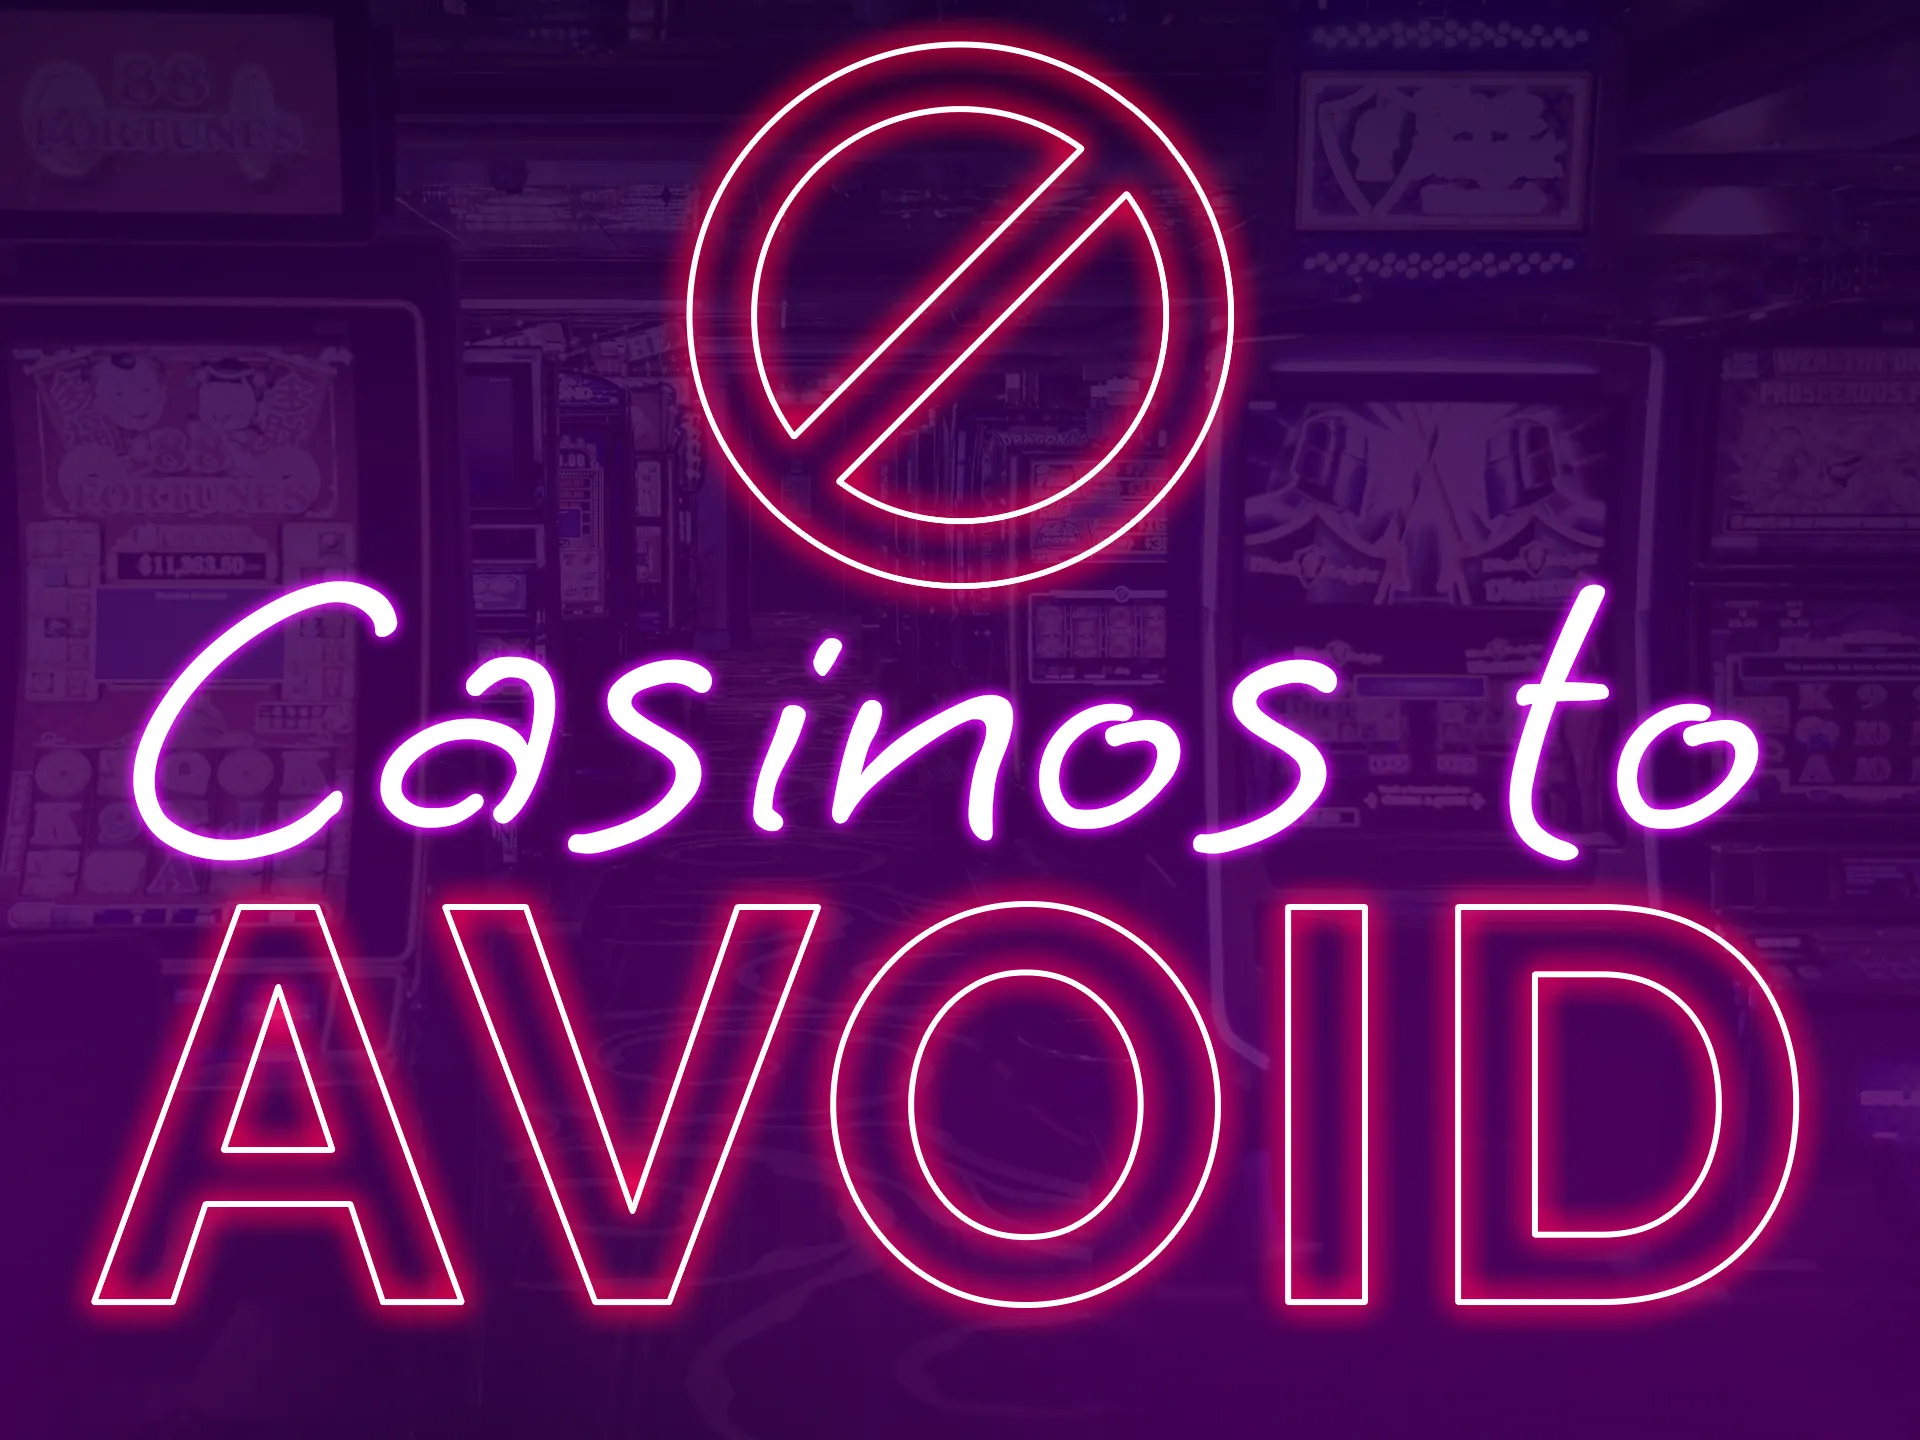 We advise you to avoid some casinos as they may be unfair.